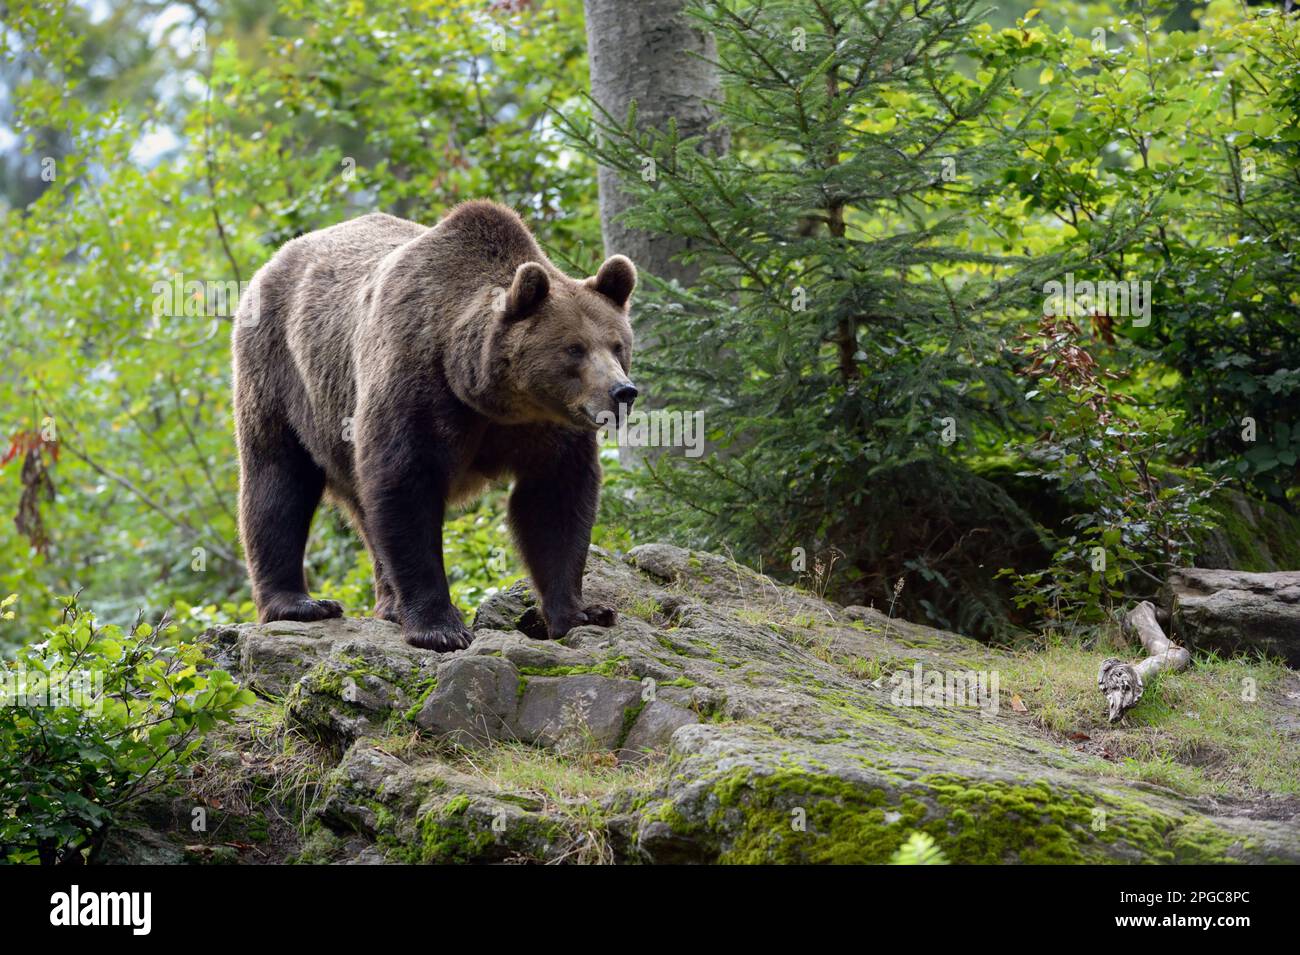 European Brown Bear,  large bear species found across Eurasia, massive and strong animal, standing on rocks in a forest. Stock Photo